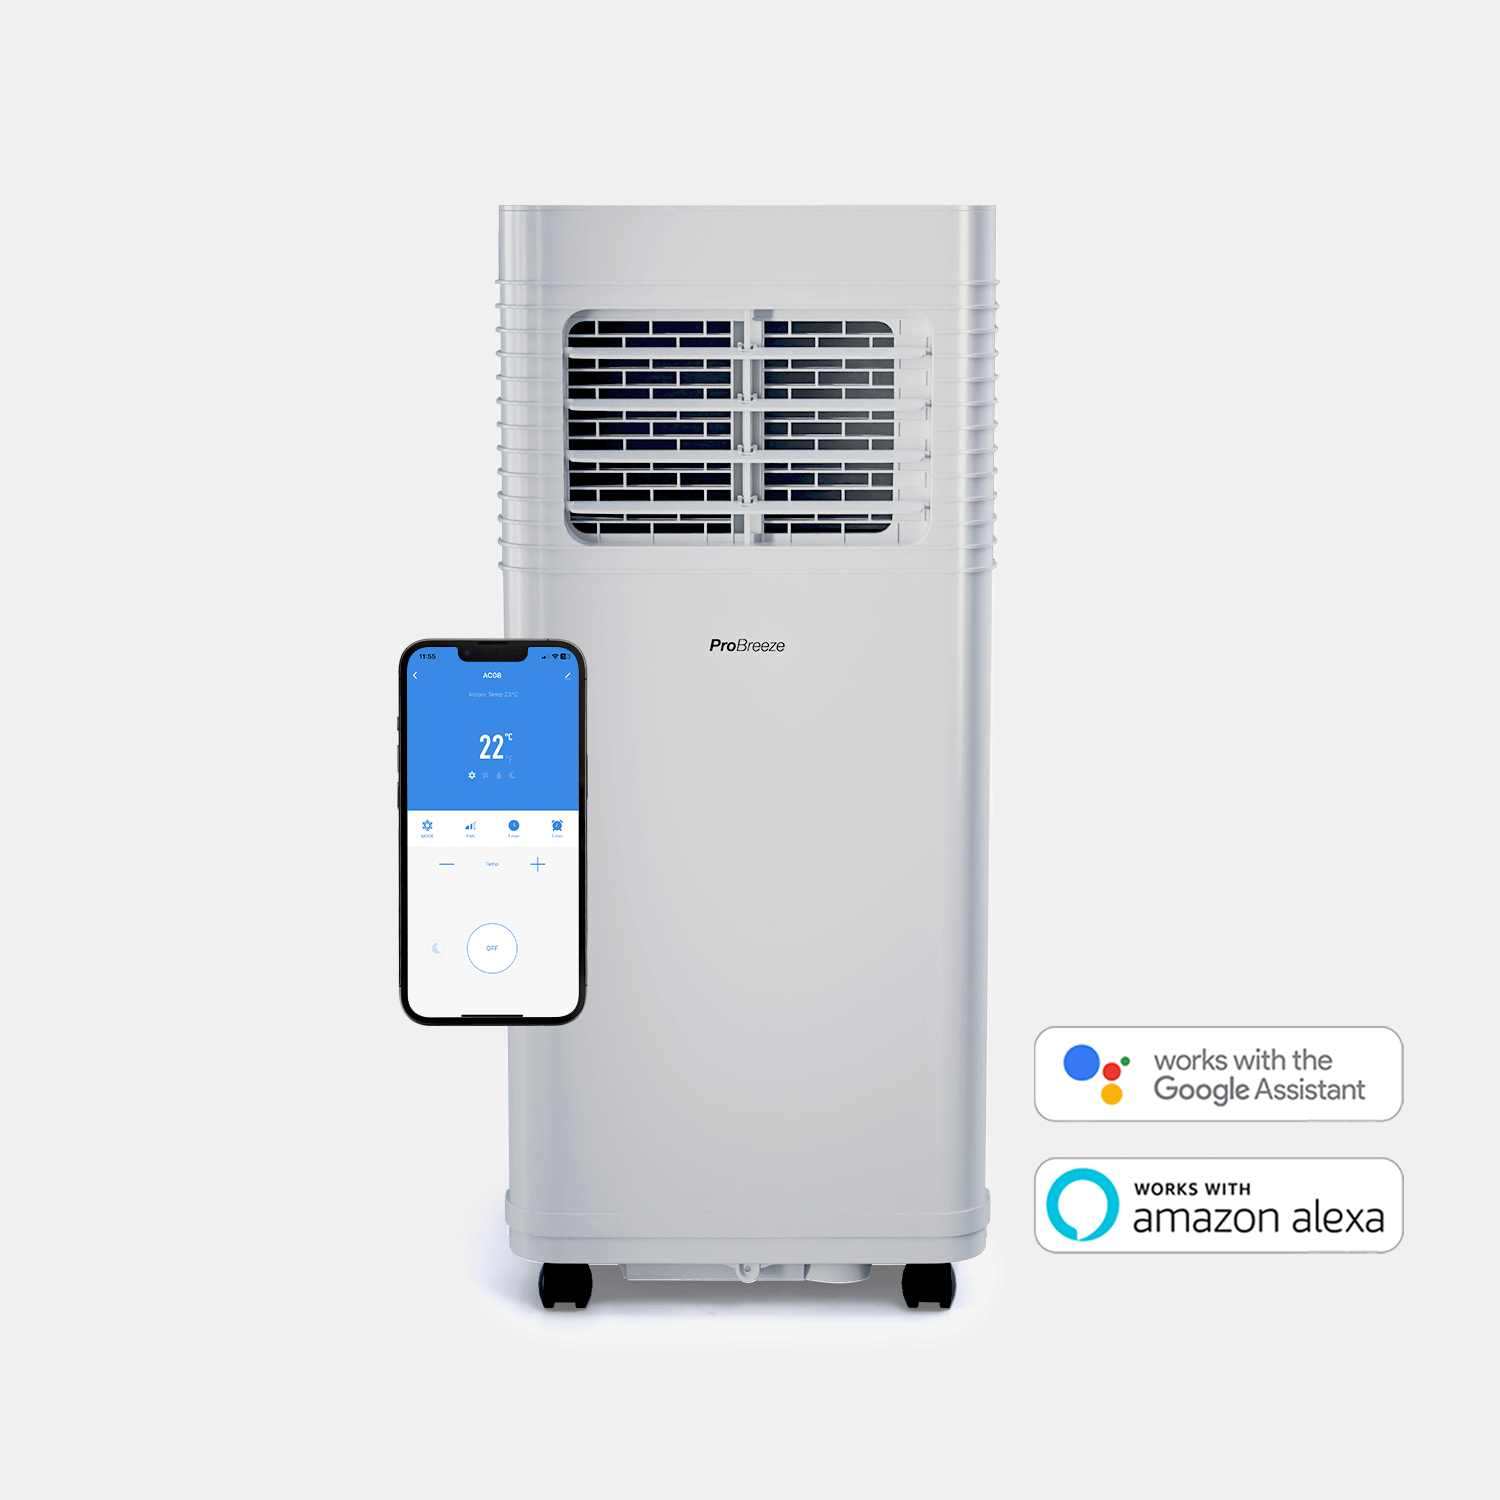 5000 BTU 4-in-1 Portable Air Conditioner & Dehumidifying Function - Wifi Smart App and Voice Control